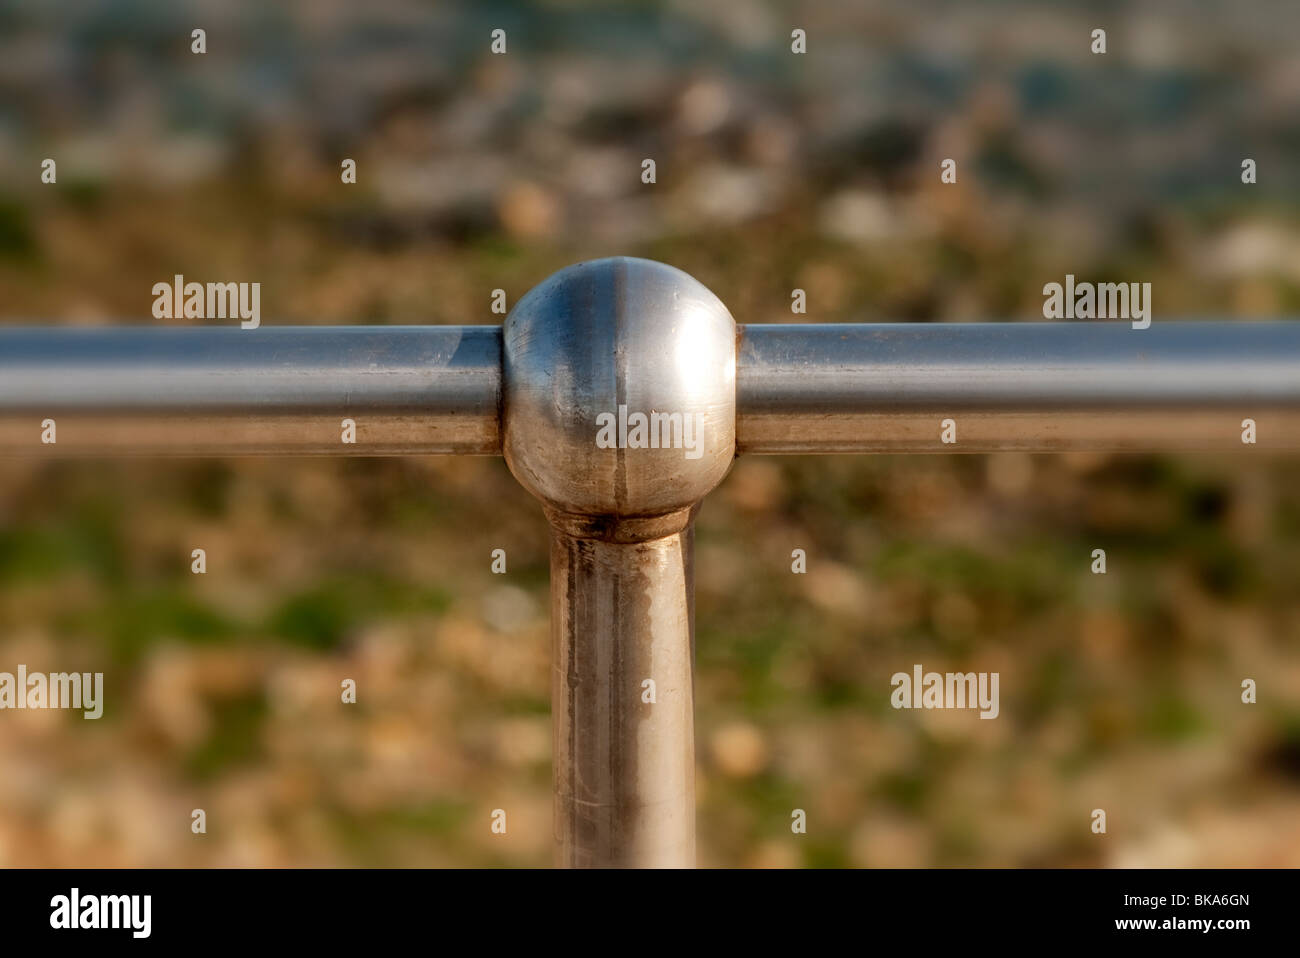 close up of a stainless steel handrail Stock Photo